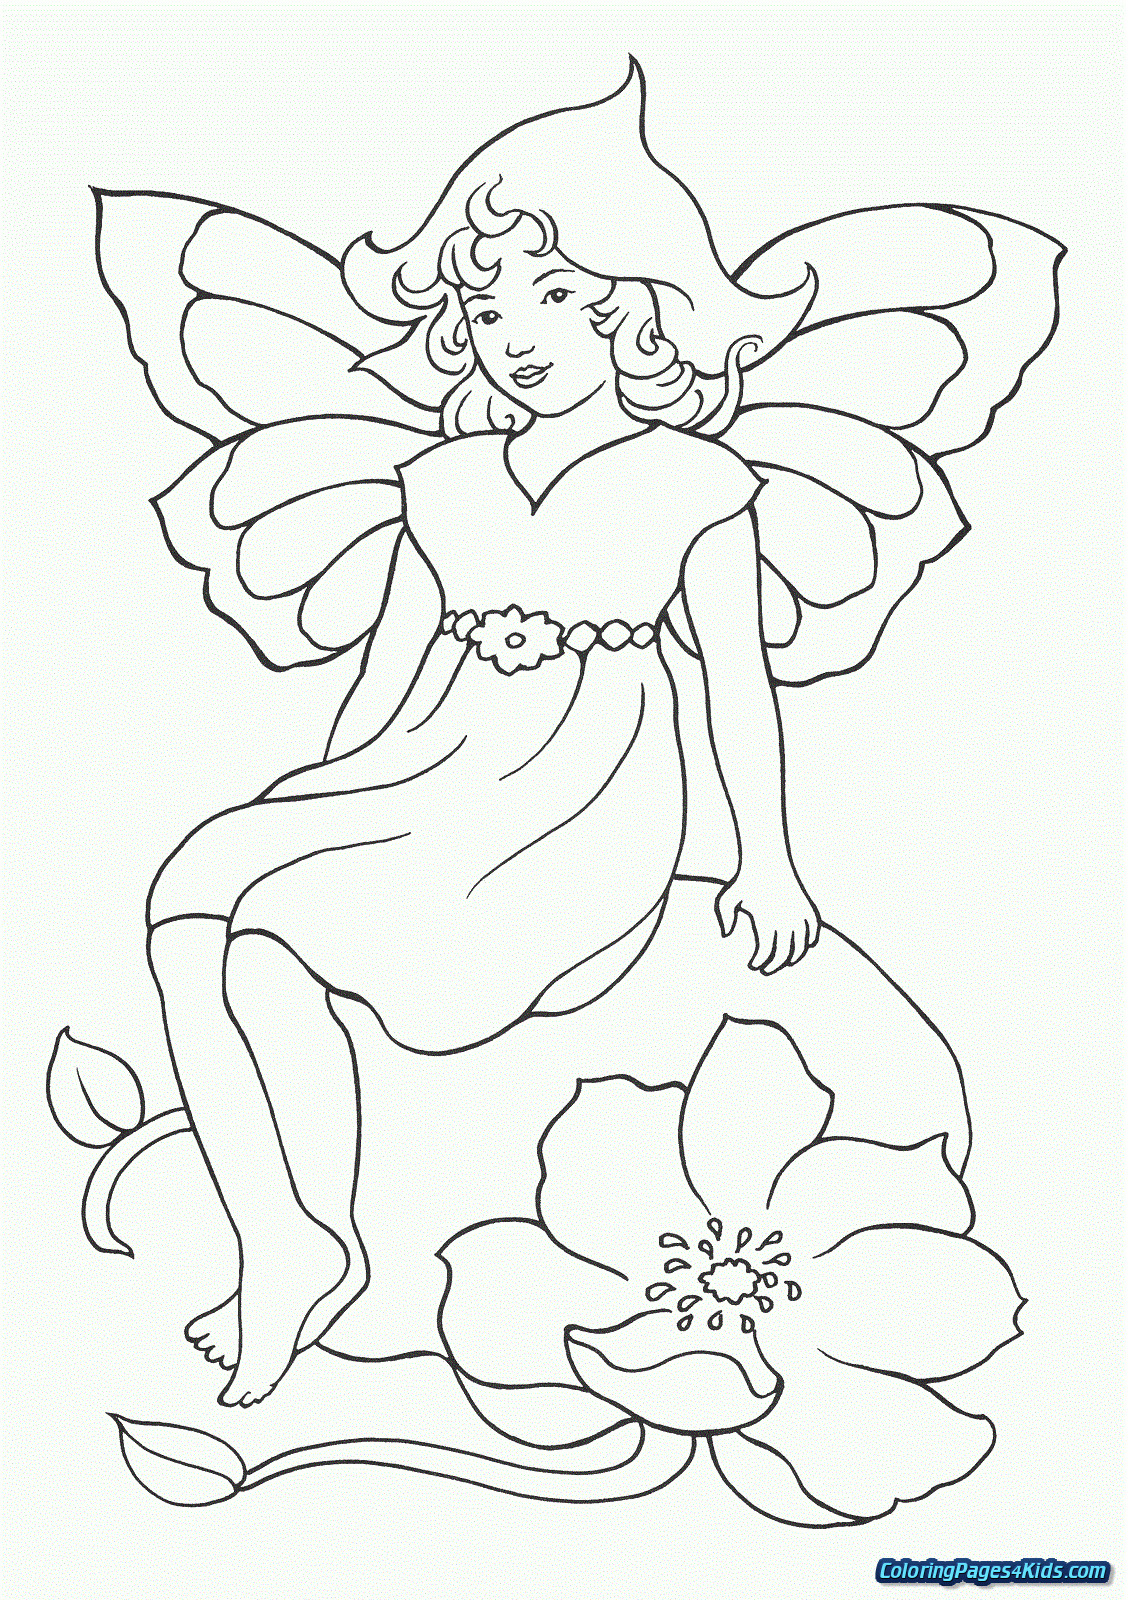 Elf Coloring Pages Printable Buddy The Elf Coloring Pages Free Printable Coloring Pages